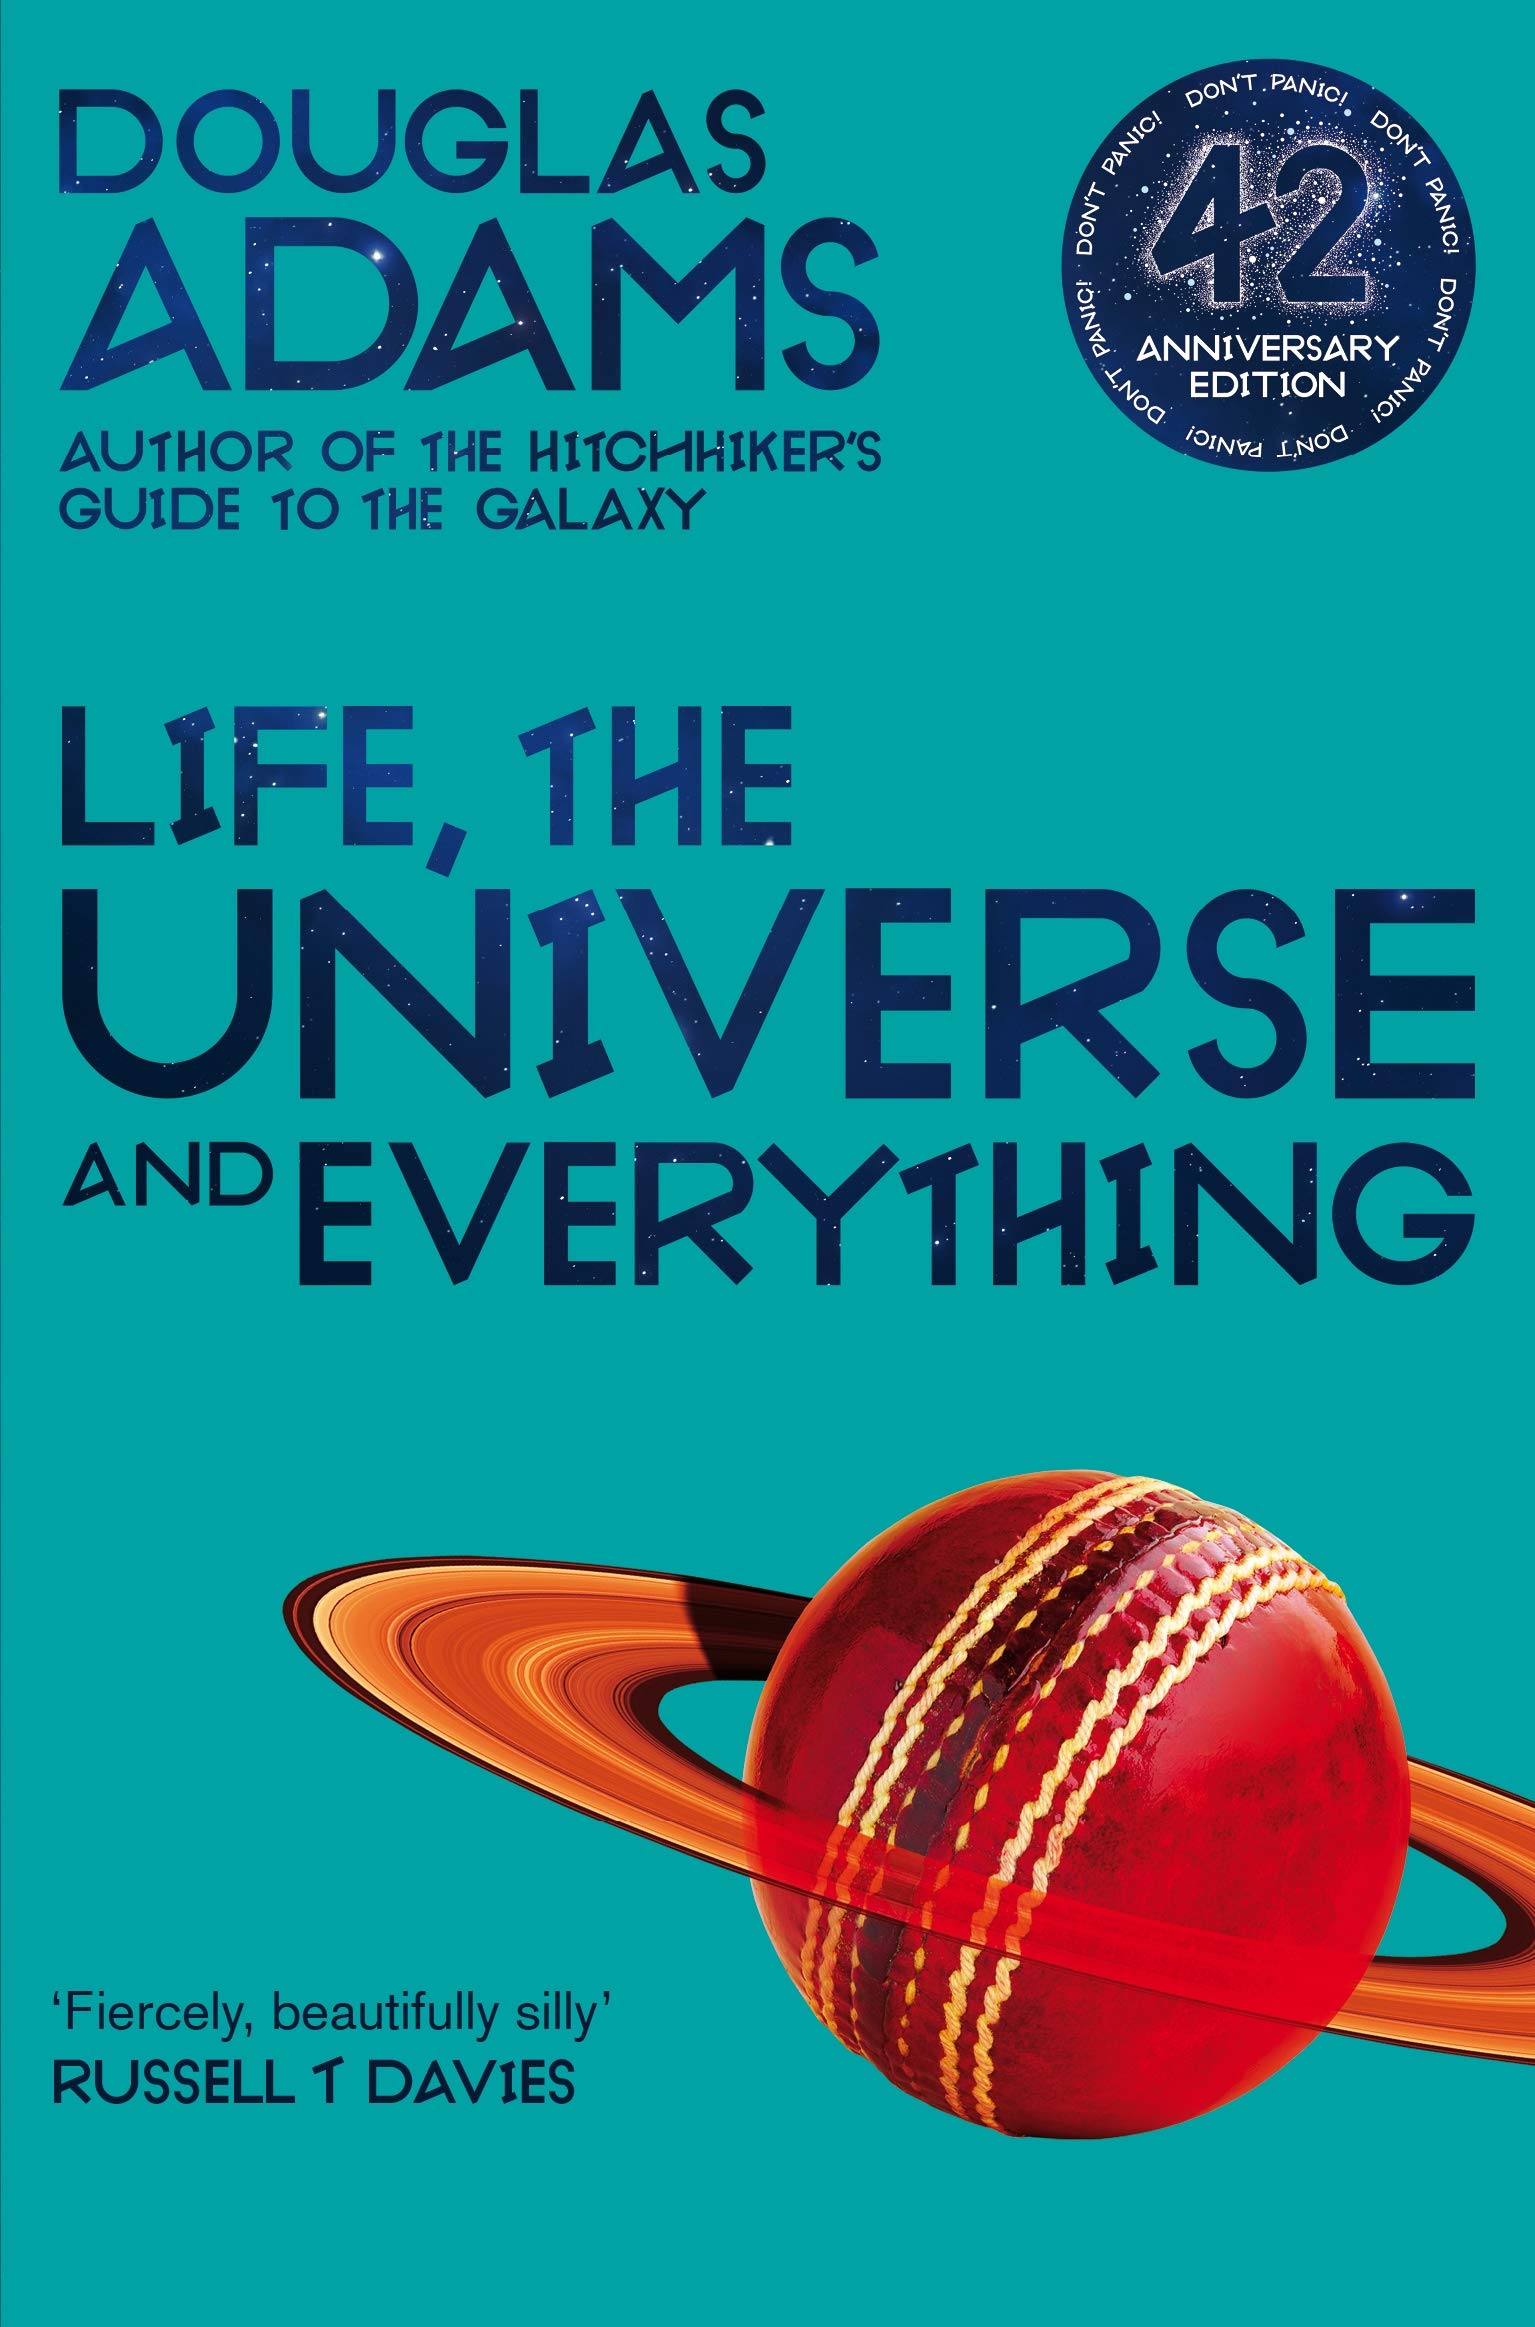 life-the-universe-and-everything-douglas-adams